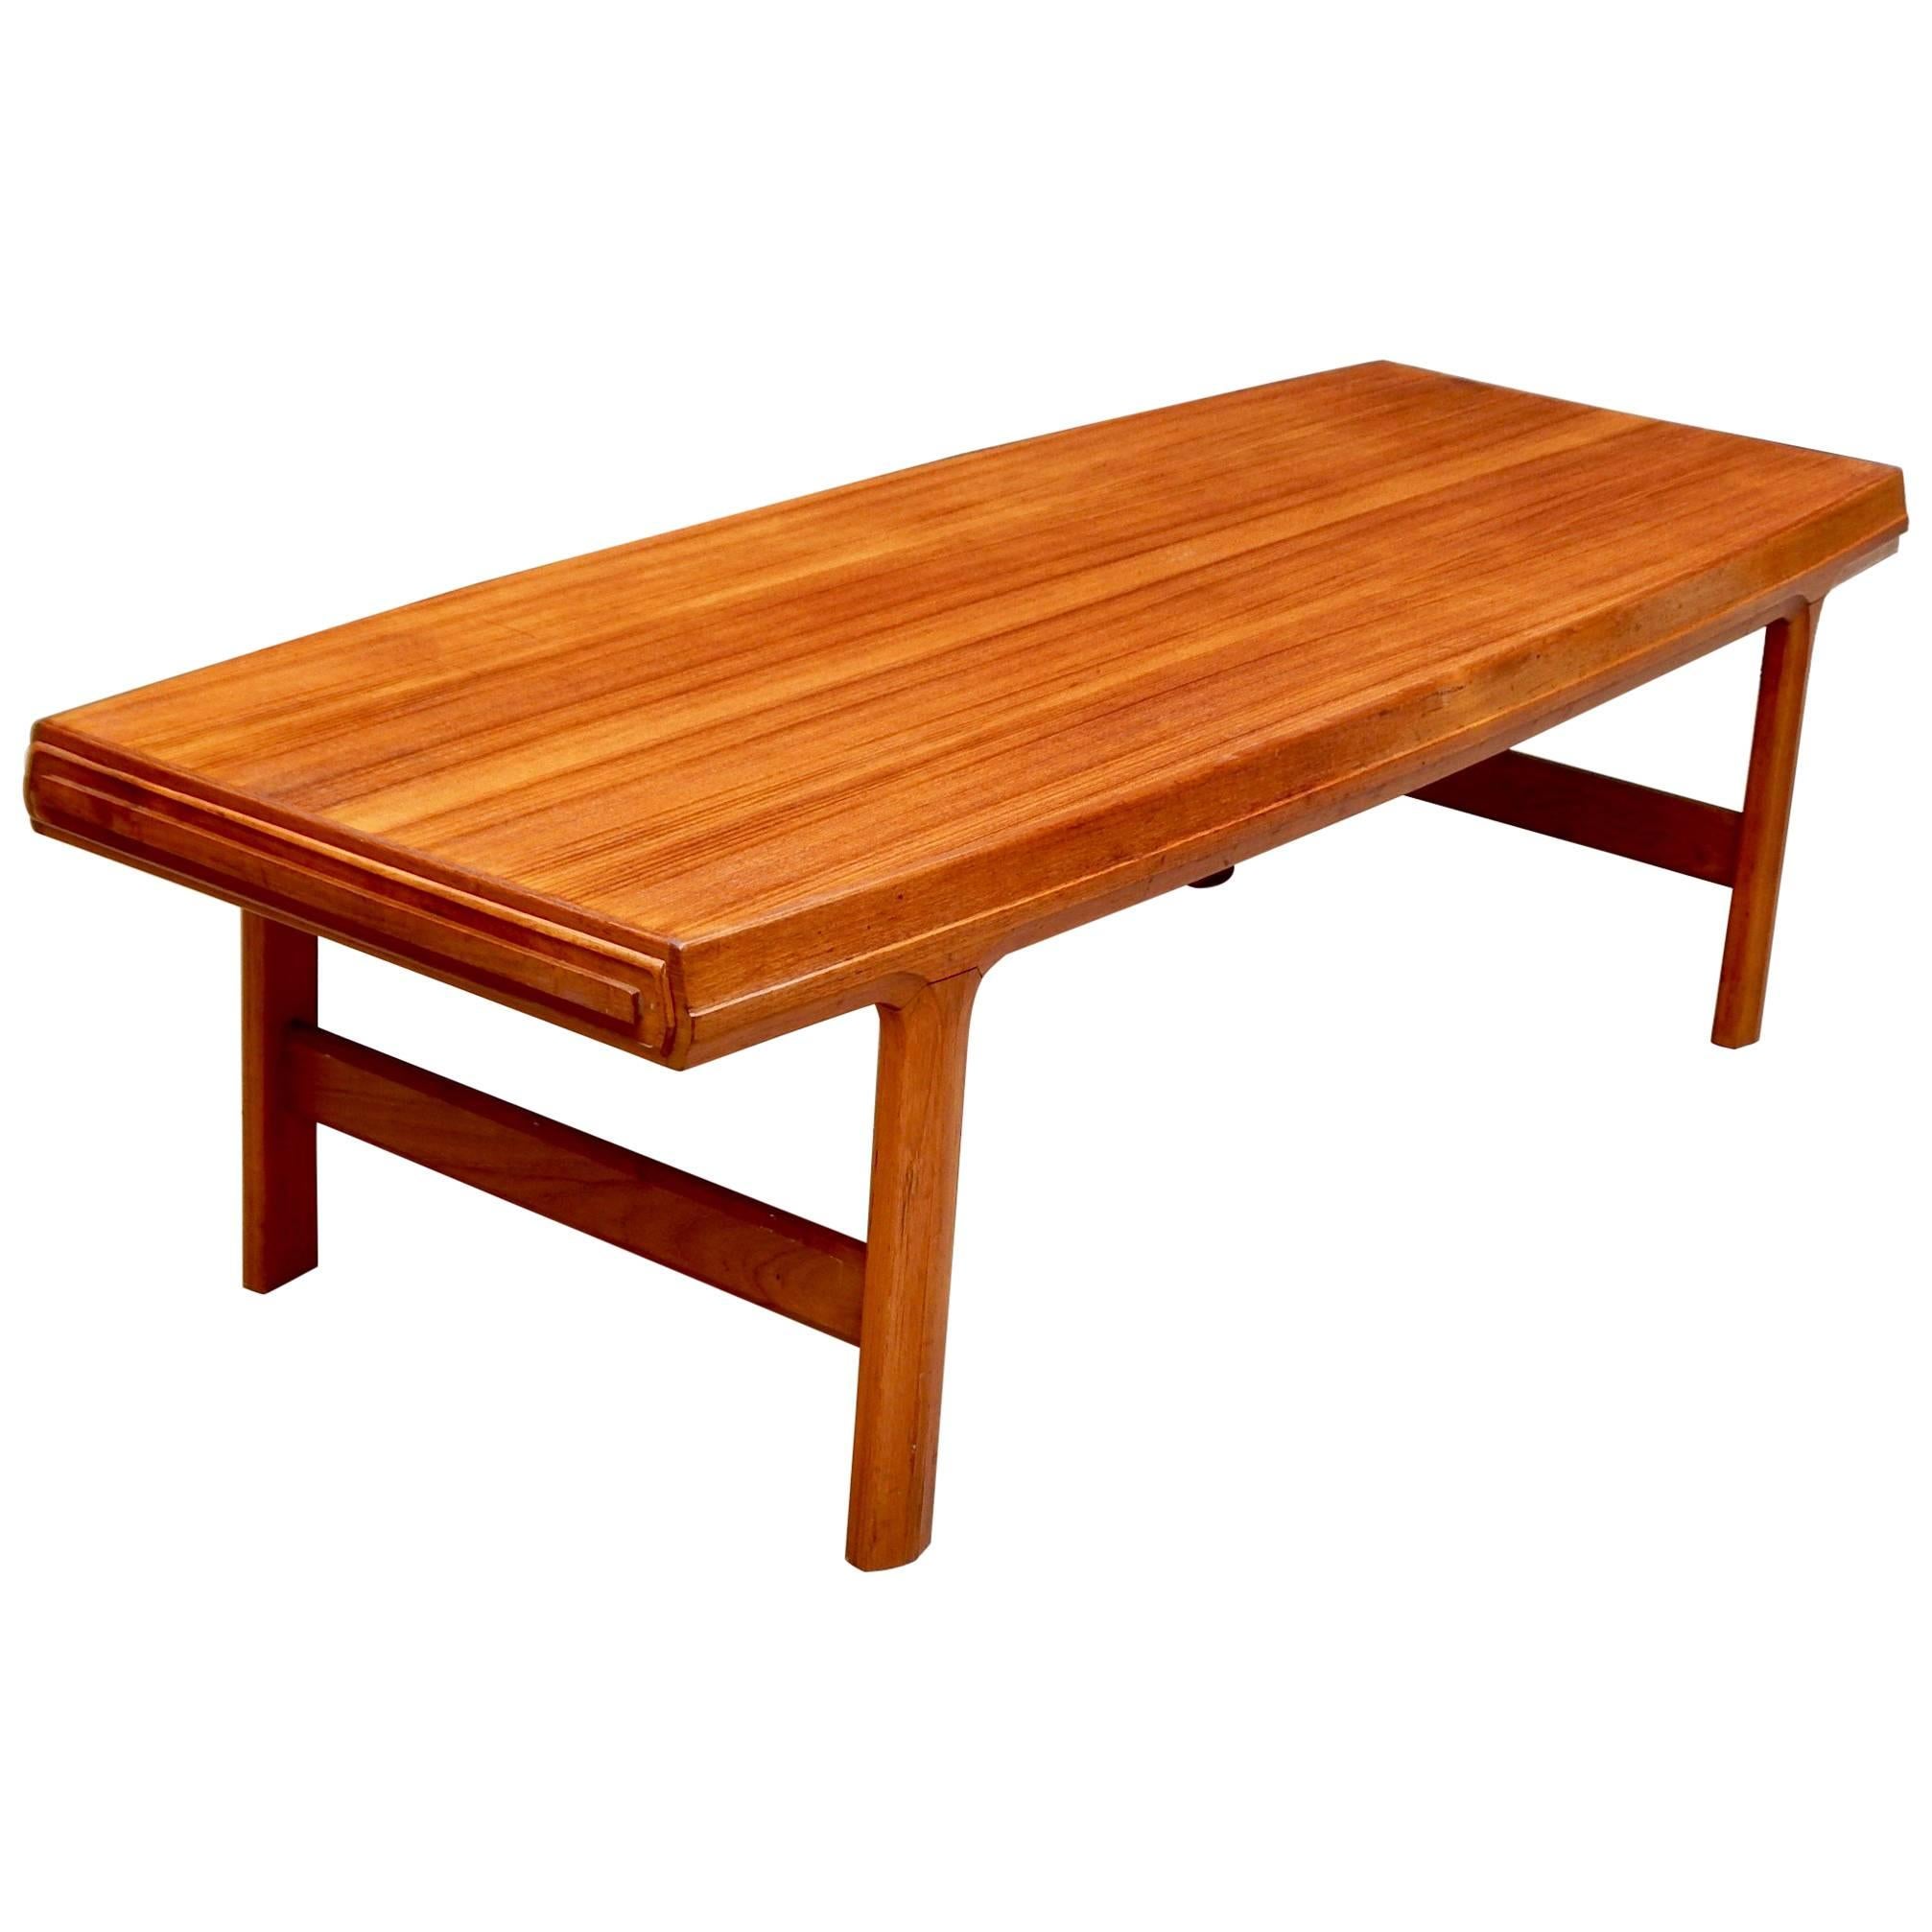 Swedish Mid-Century Modern Teak Coffee Table with Hidden Side Drawers For Sale